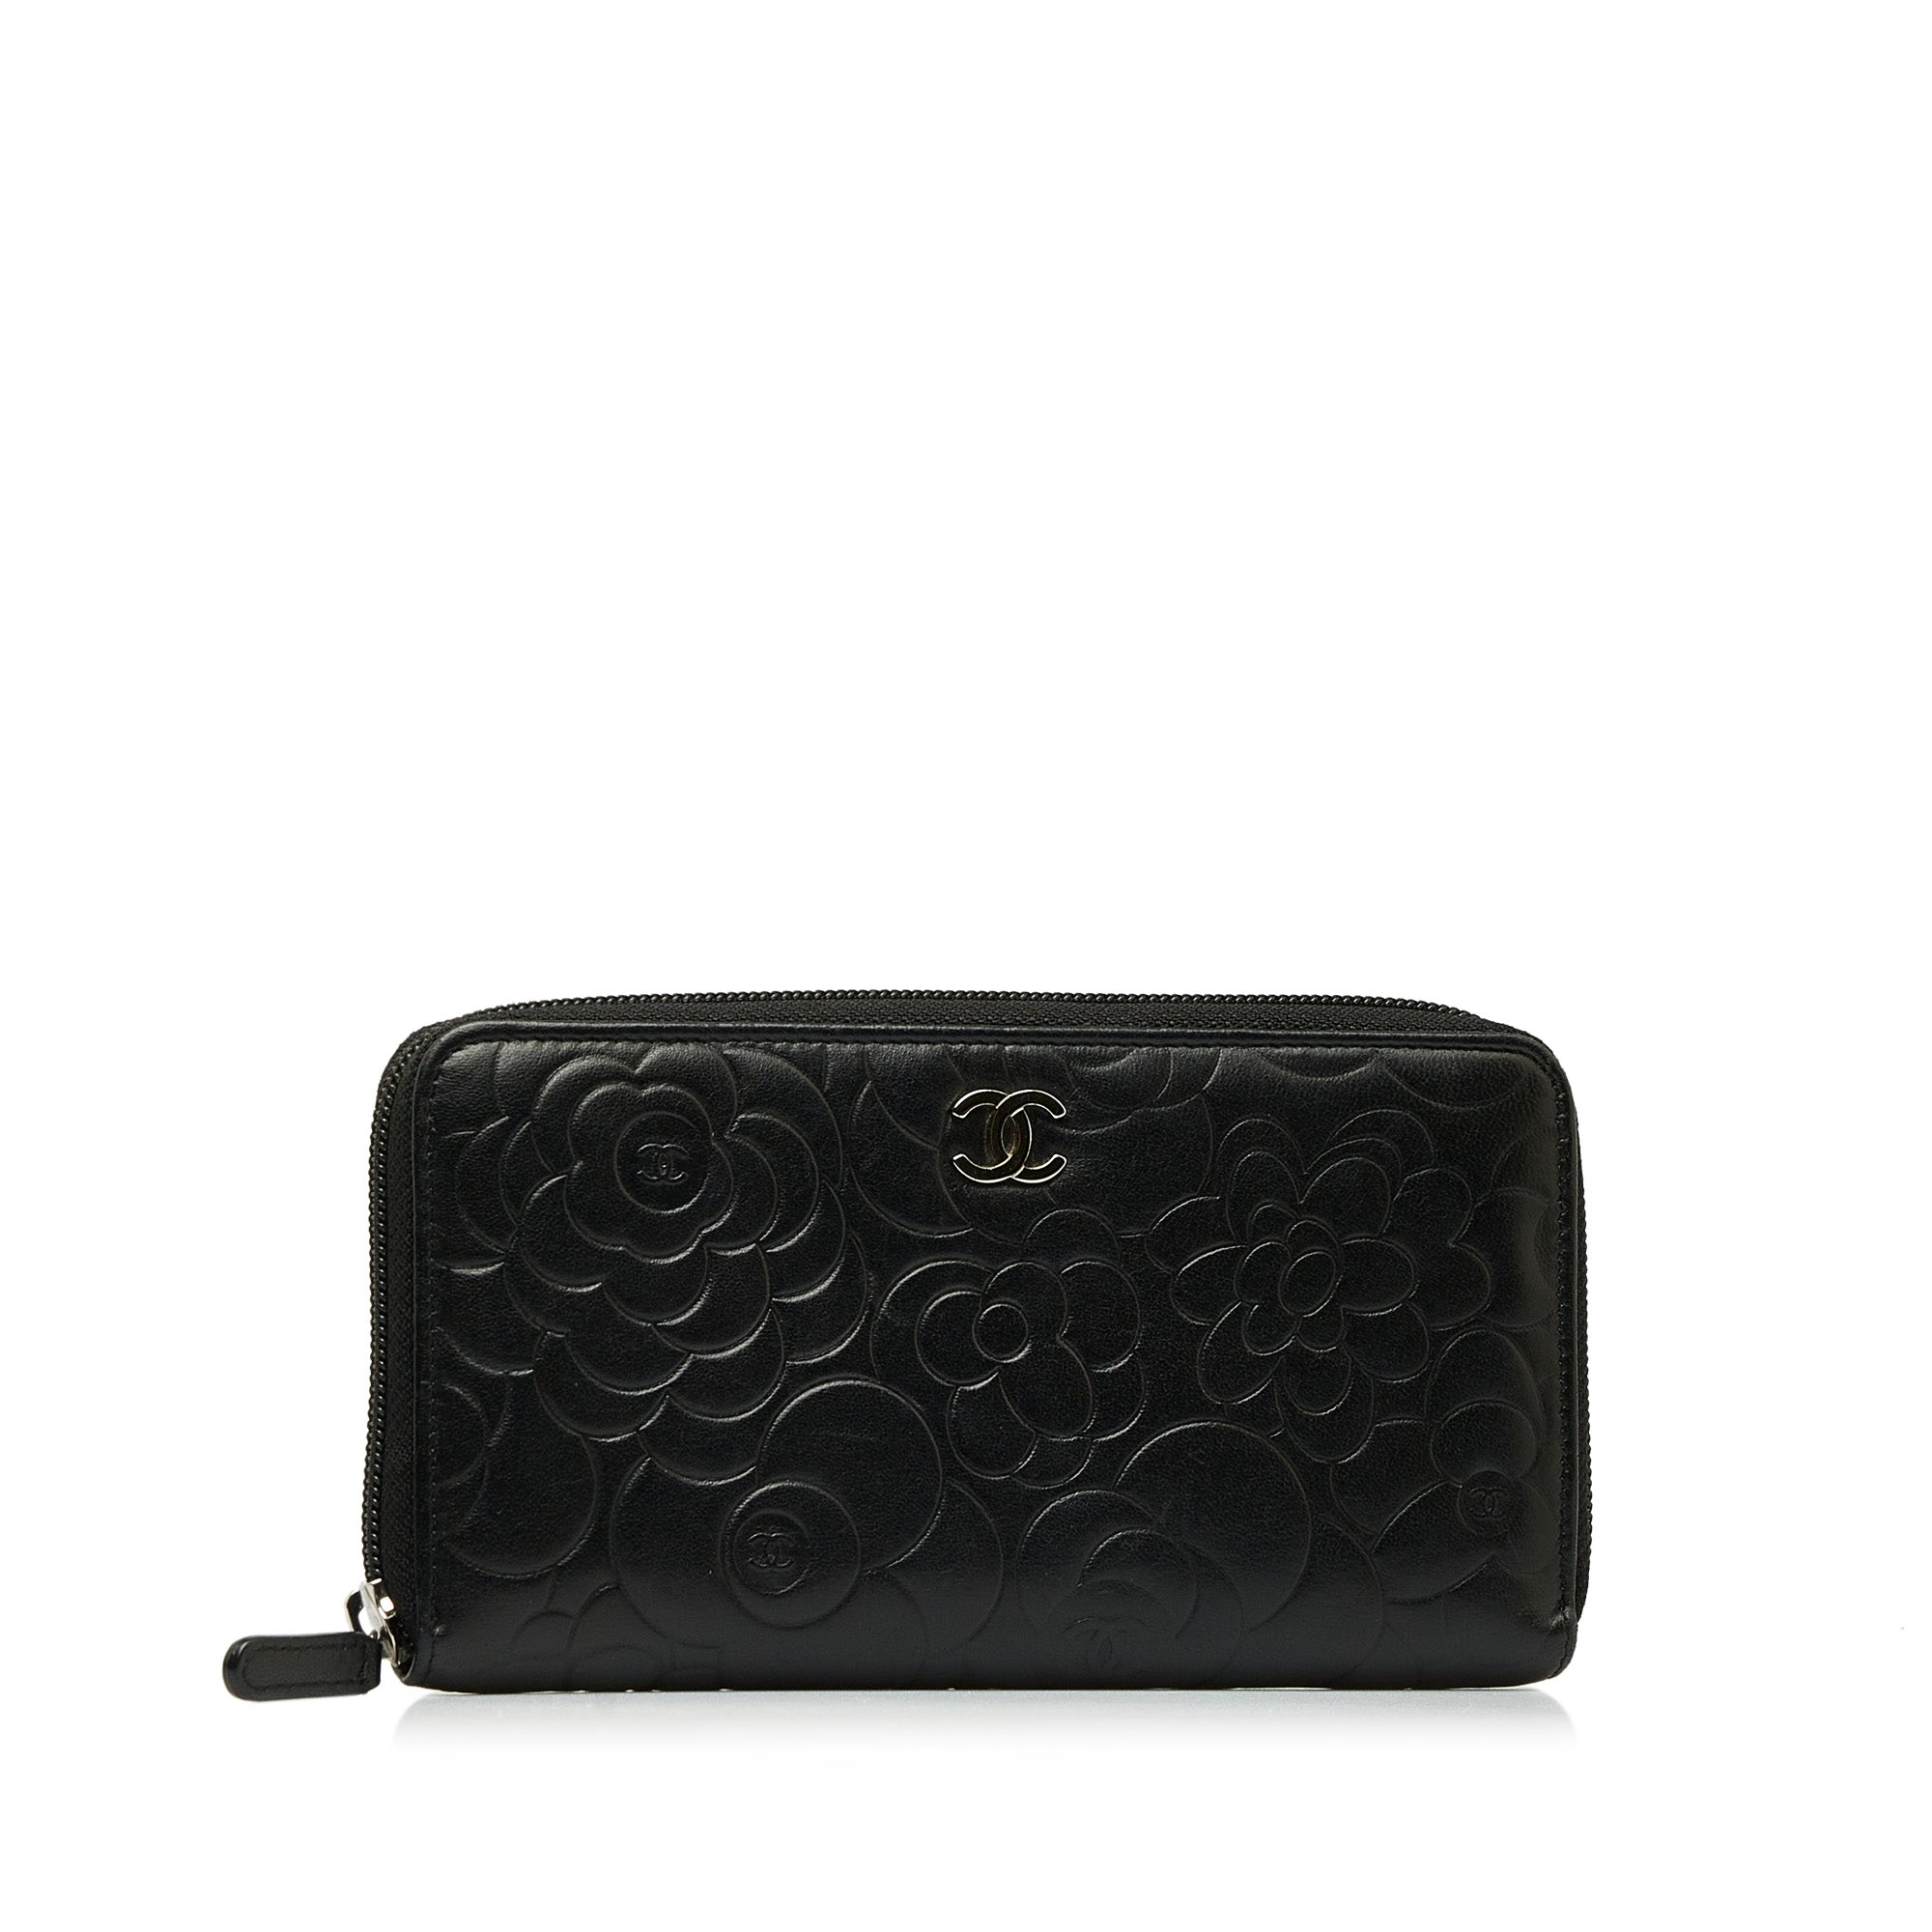 CHANEL, MIDNIGHT BLUE QUILTED FLOWER FLAP MINI